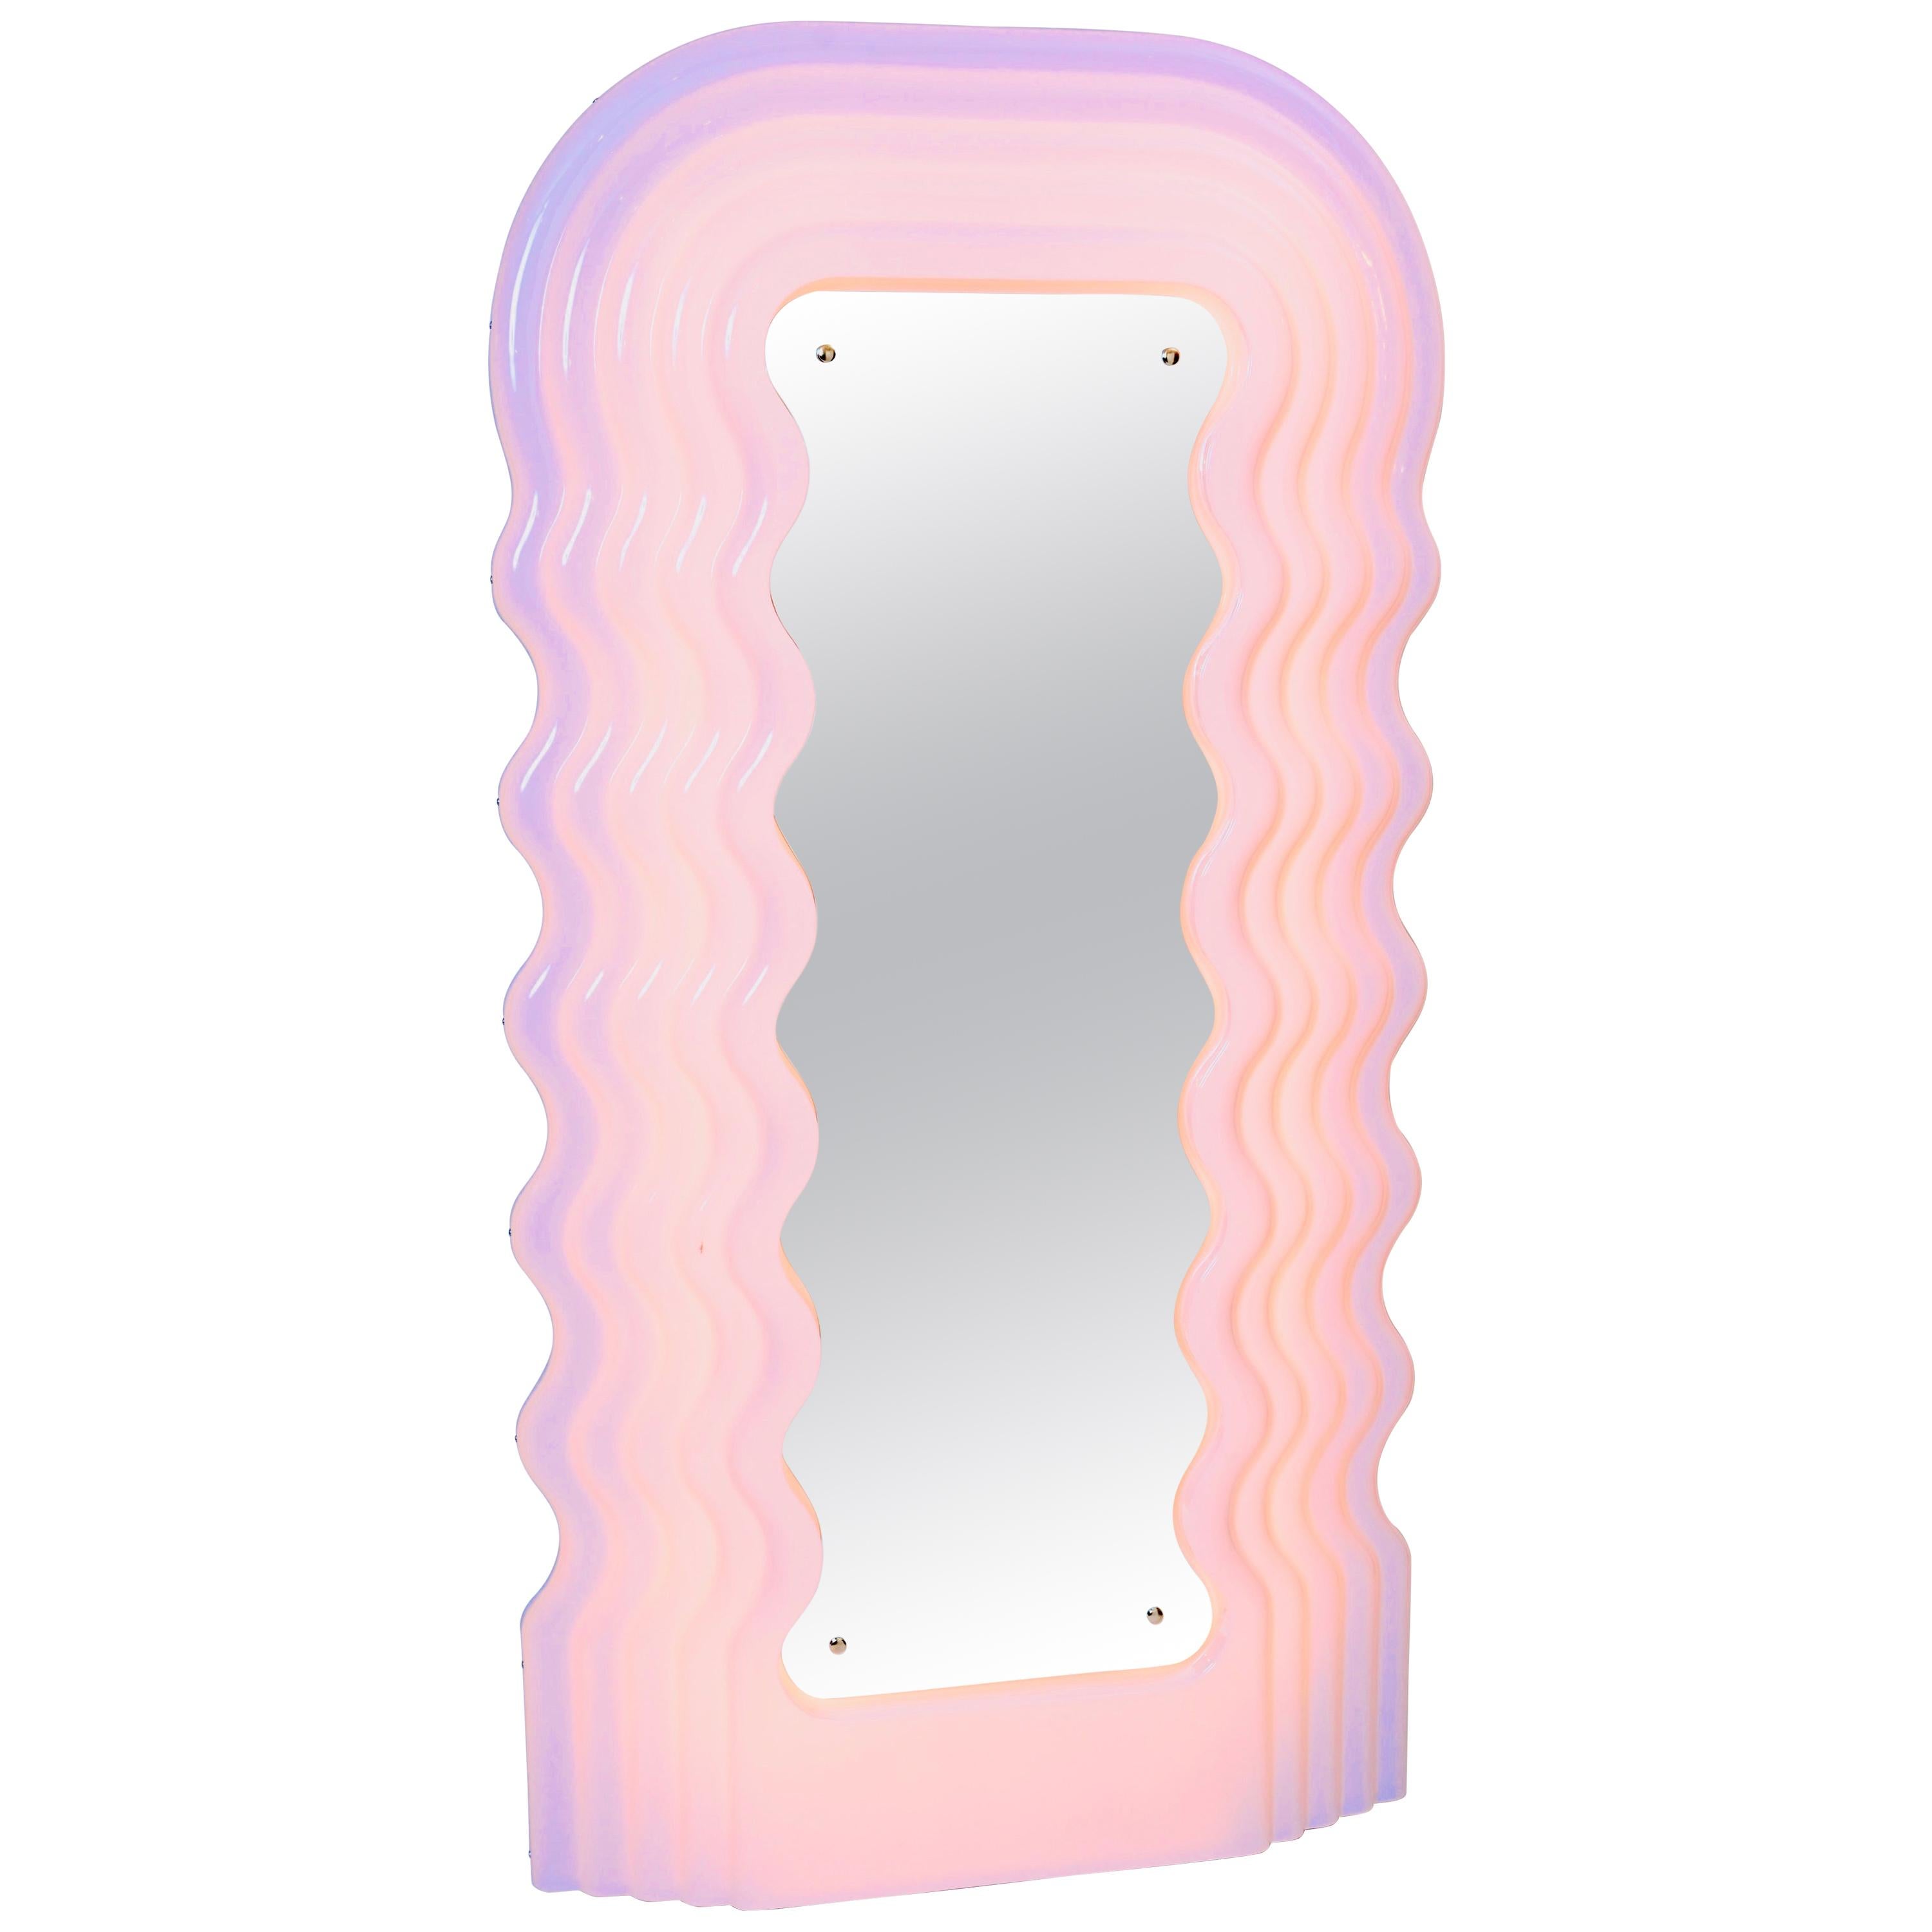 The curvaceous pink ‘Ultrafragola’ mirror designed by Ettore Sottsass is probably the most iconic of all his many designs. Originally produced in the 1970s by Poltronova, the ‘Ultrafragola’ formed part of a series of Sottsass designs named Mobili